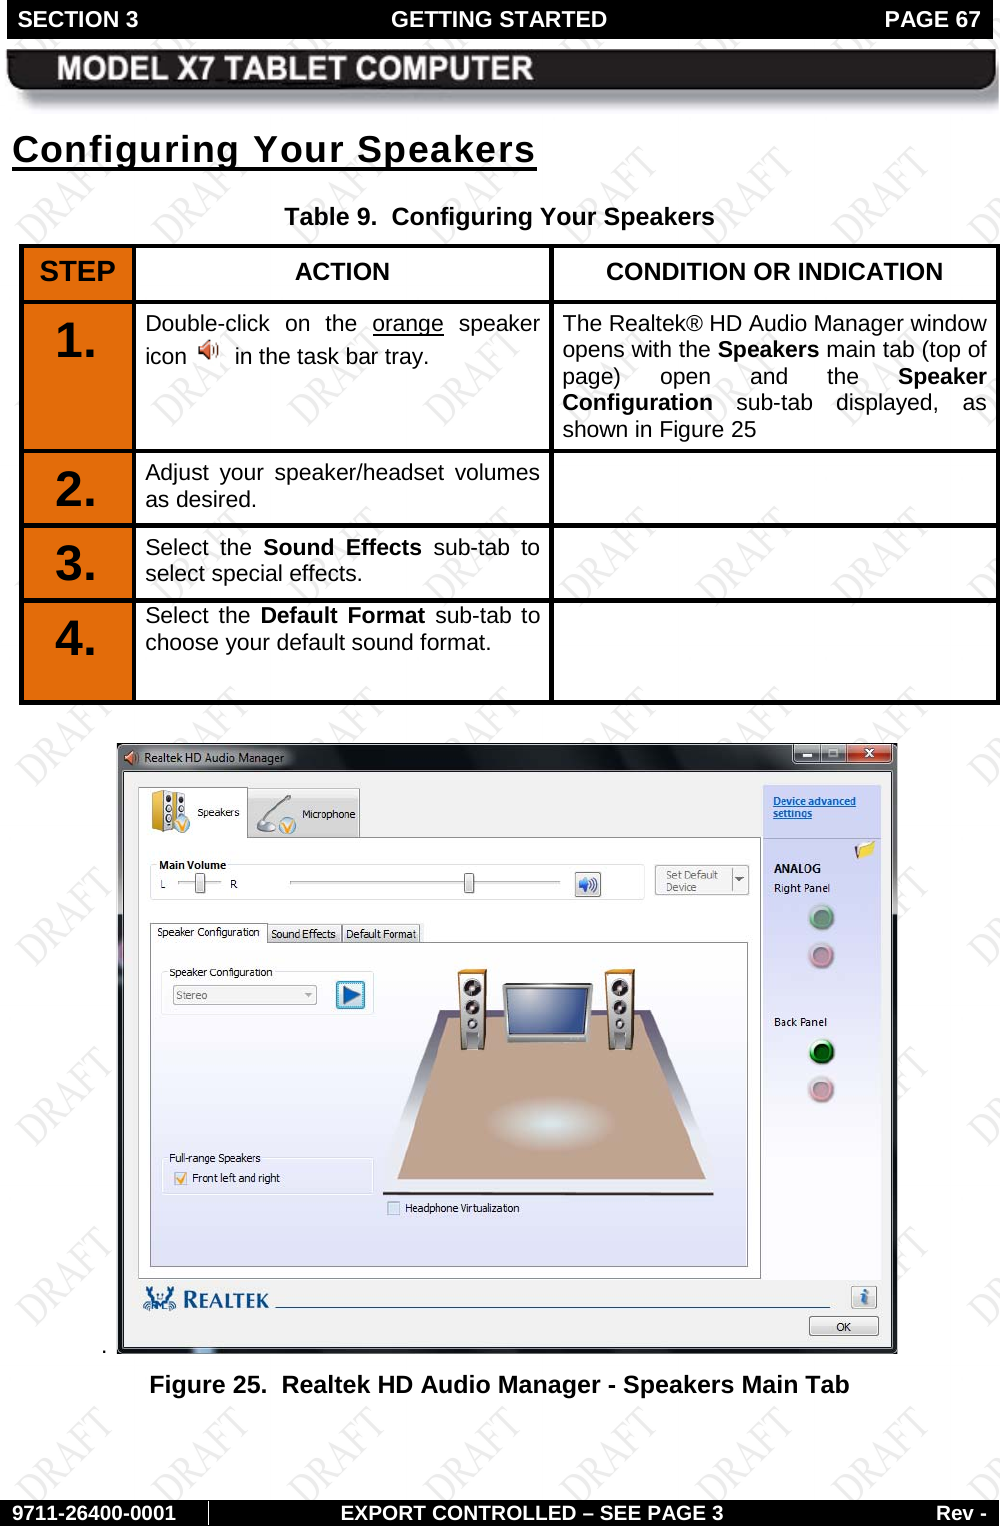 SECTION 3 GETTING STARTED  PAGE 67        9711-26400-0001 EXPORT CONTROLLED – SEE PAGE 3 Rev - Configuring Your Speakers Table 9.  Configuring Your Speakers STEP  ACTION CONDITION OR INDICATION 1.   Double-click on the orange speaker icon    in the task bar tray. The Realtek® HD Audio Manager window opens with the Speakers main tab (top of page) open and the Speaker Configuration sub-tab displayed, as shown in Figure 25 2.   Adjust your speaker/headset volumes as desired.  3.   Select the Sound Effects sub-tab to select special effects.  4.  Select the Default Format sub-tab to choose your default sound format.    .   Figure 25.  Realtek HD Audio Manager - Speakers Main Tab  